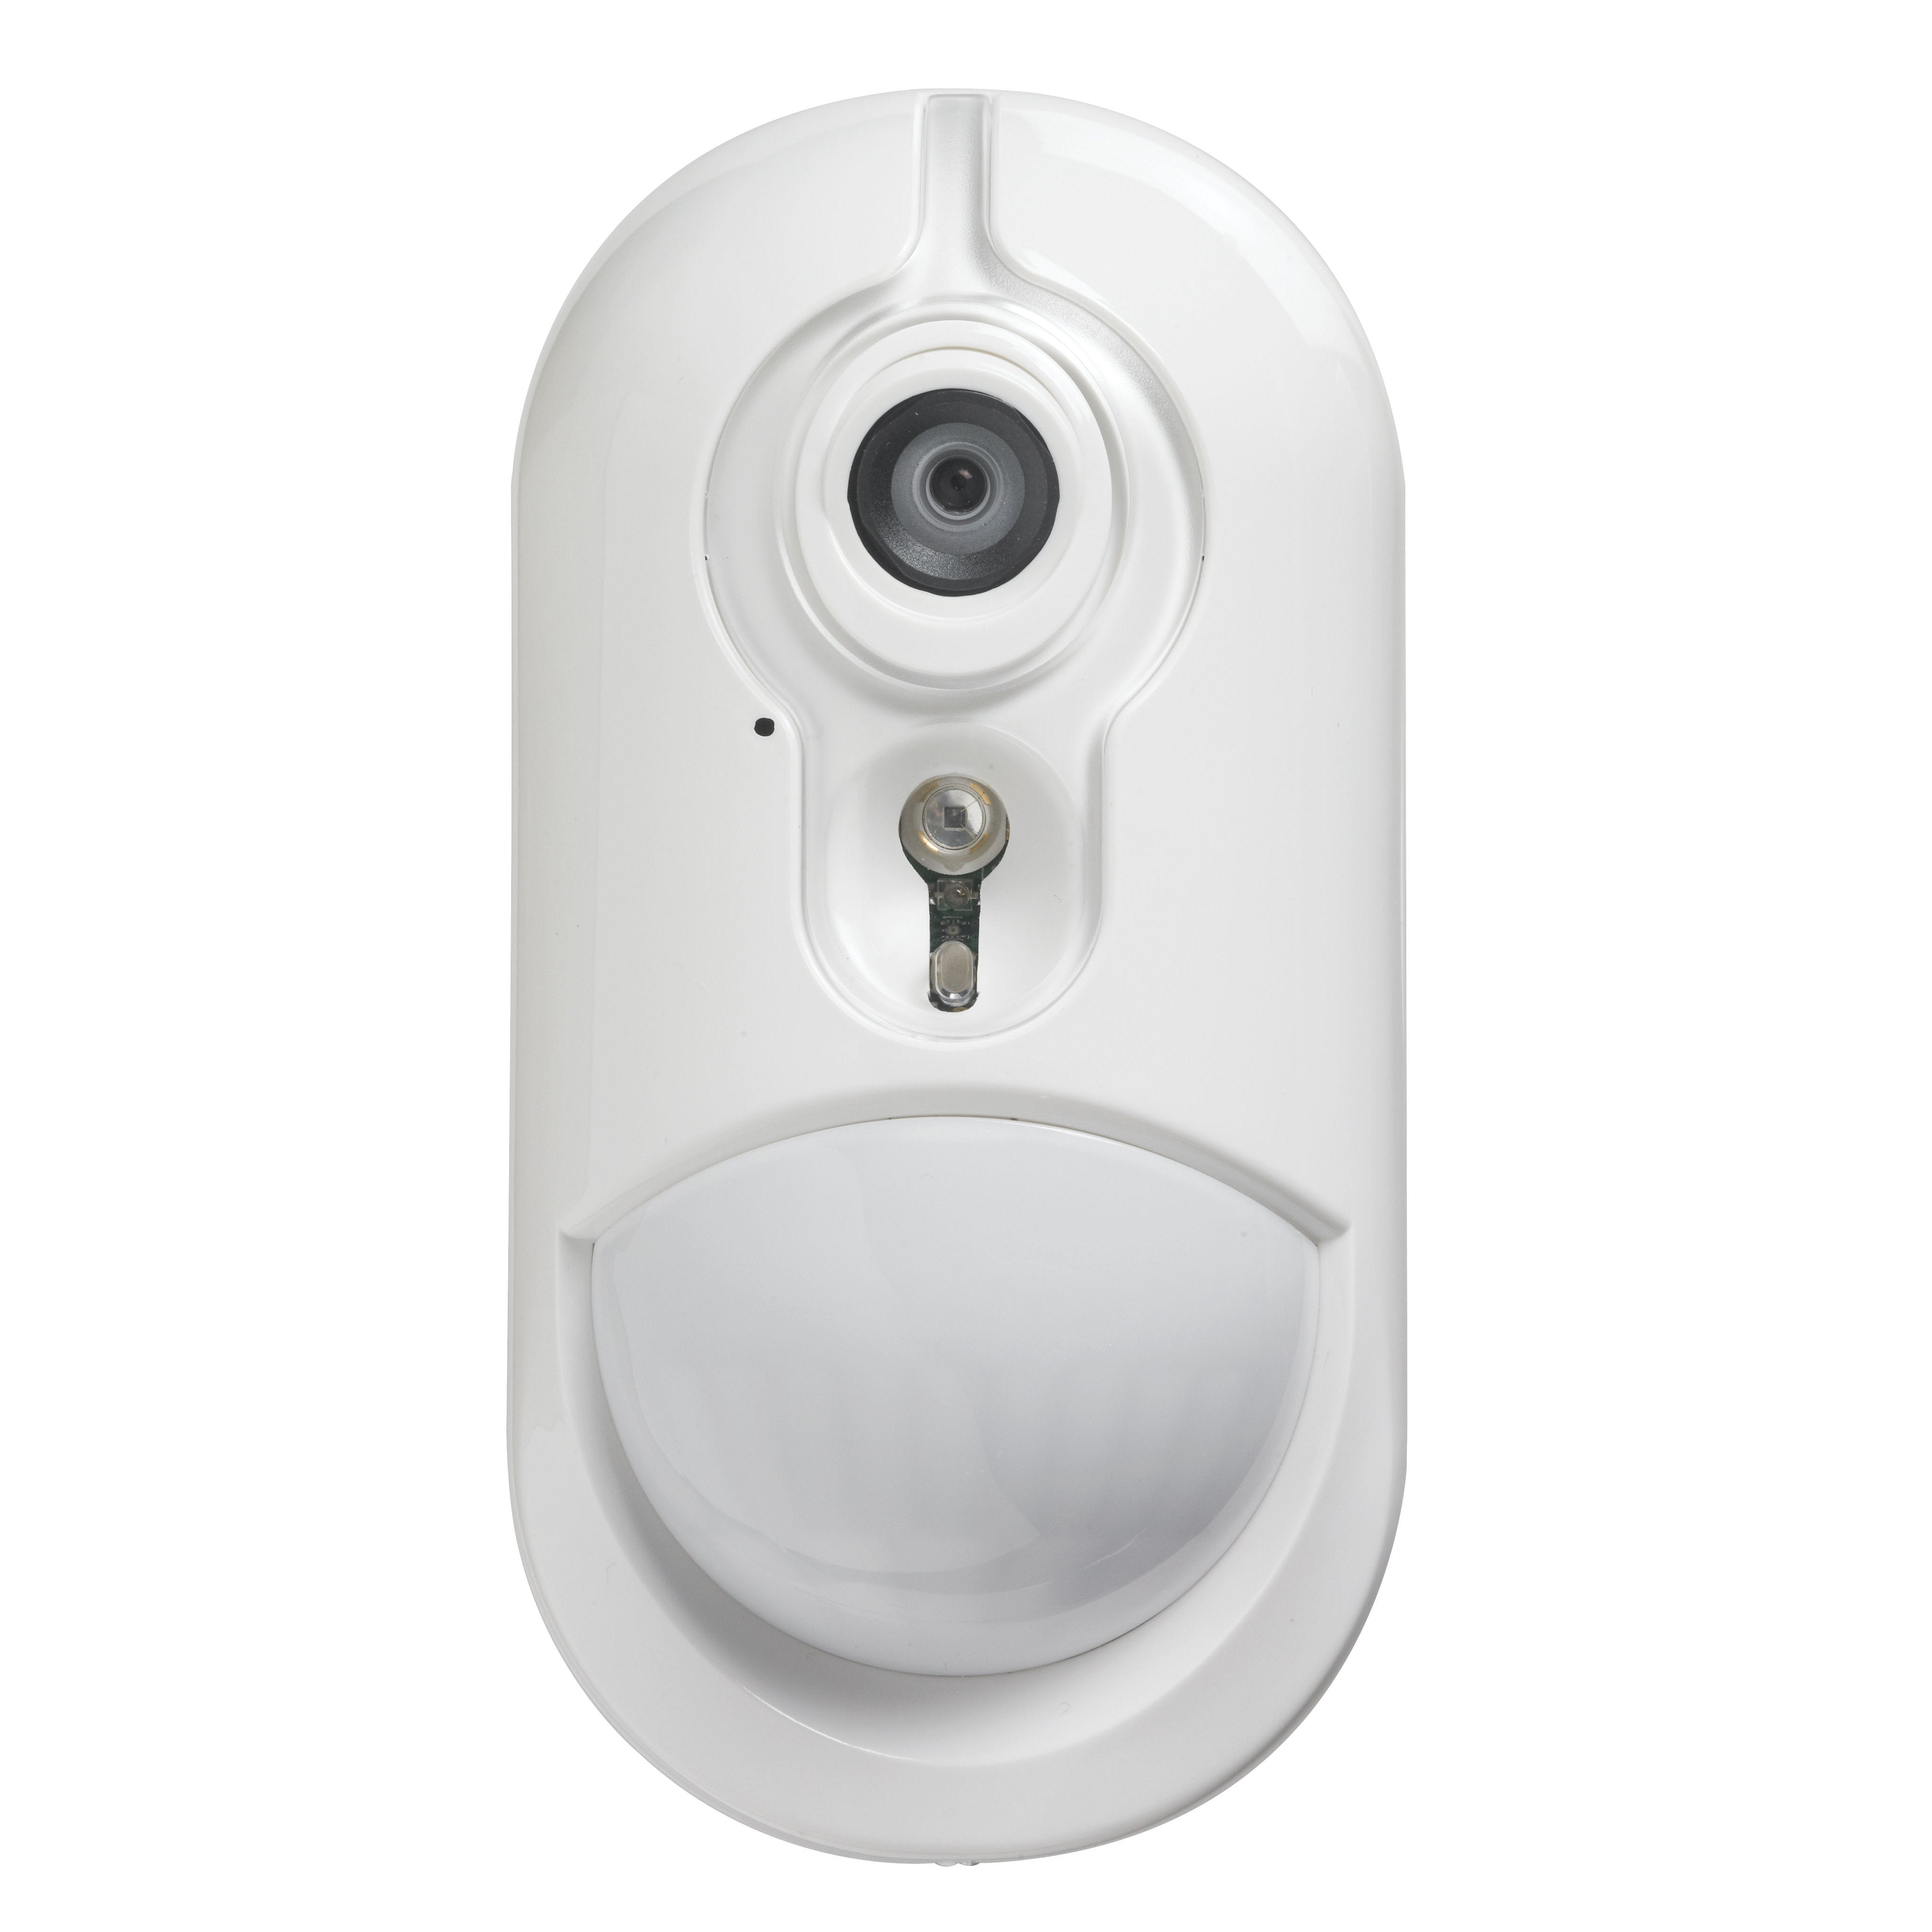 DSC* Power-G Wireless PIR Motion Detector with Integrated Camera and PET Immunity (up to 38KGS), Range 12x12M @2.4M Height (requires: Cellular or Ethernet Communicator)